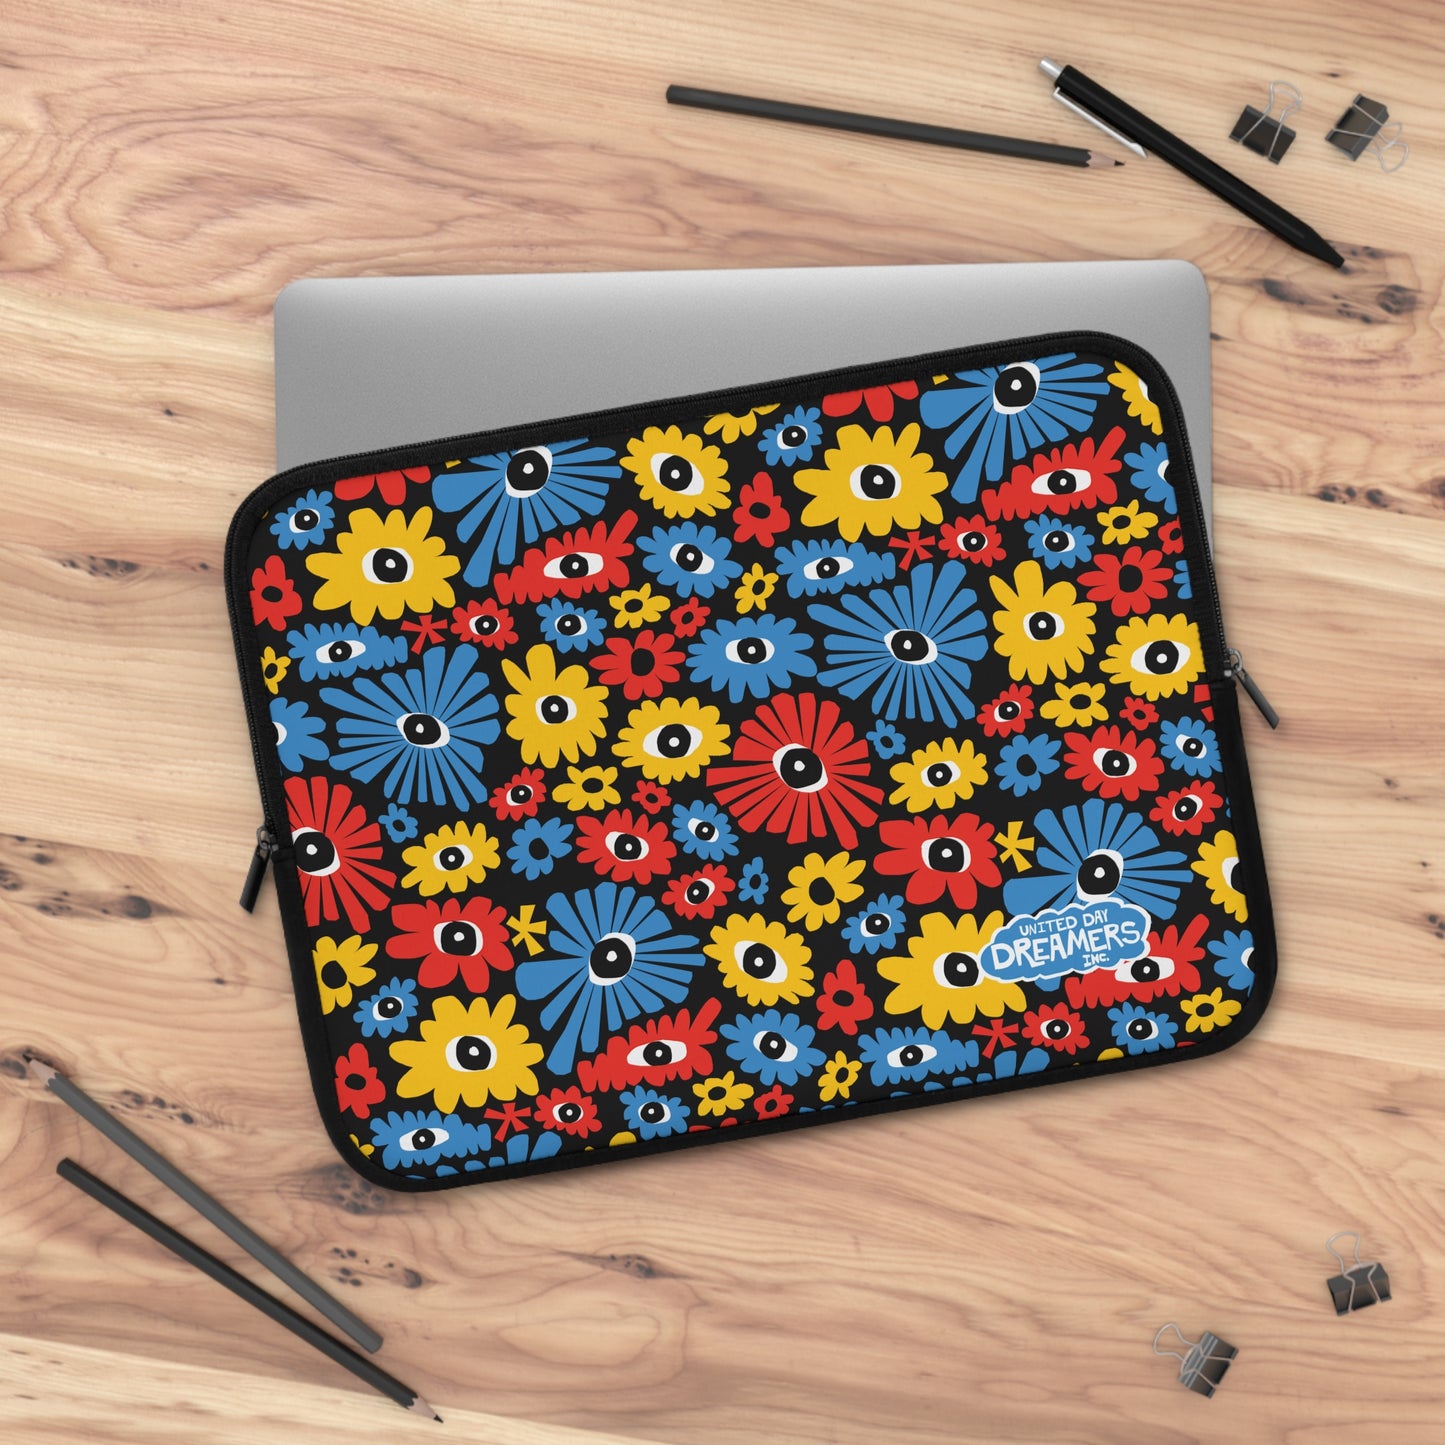 Colorful Case Sleeve For MacBook Pro And Any Other 10 to 17 Inch Laptop Computer